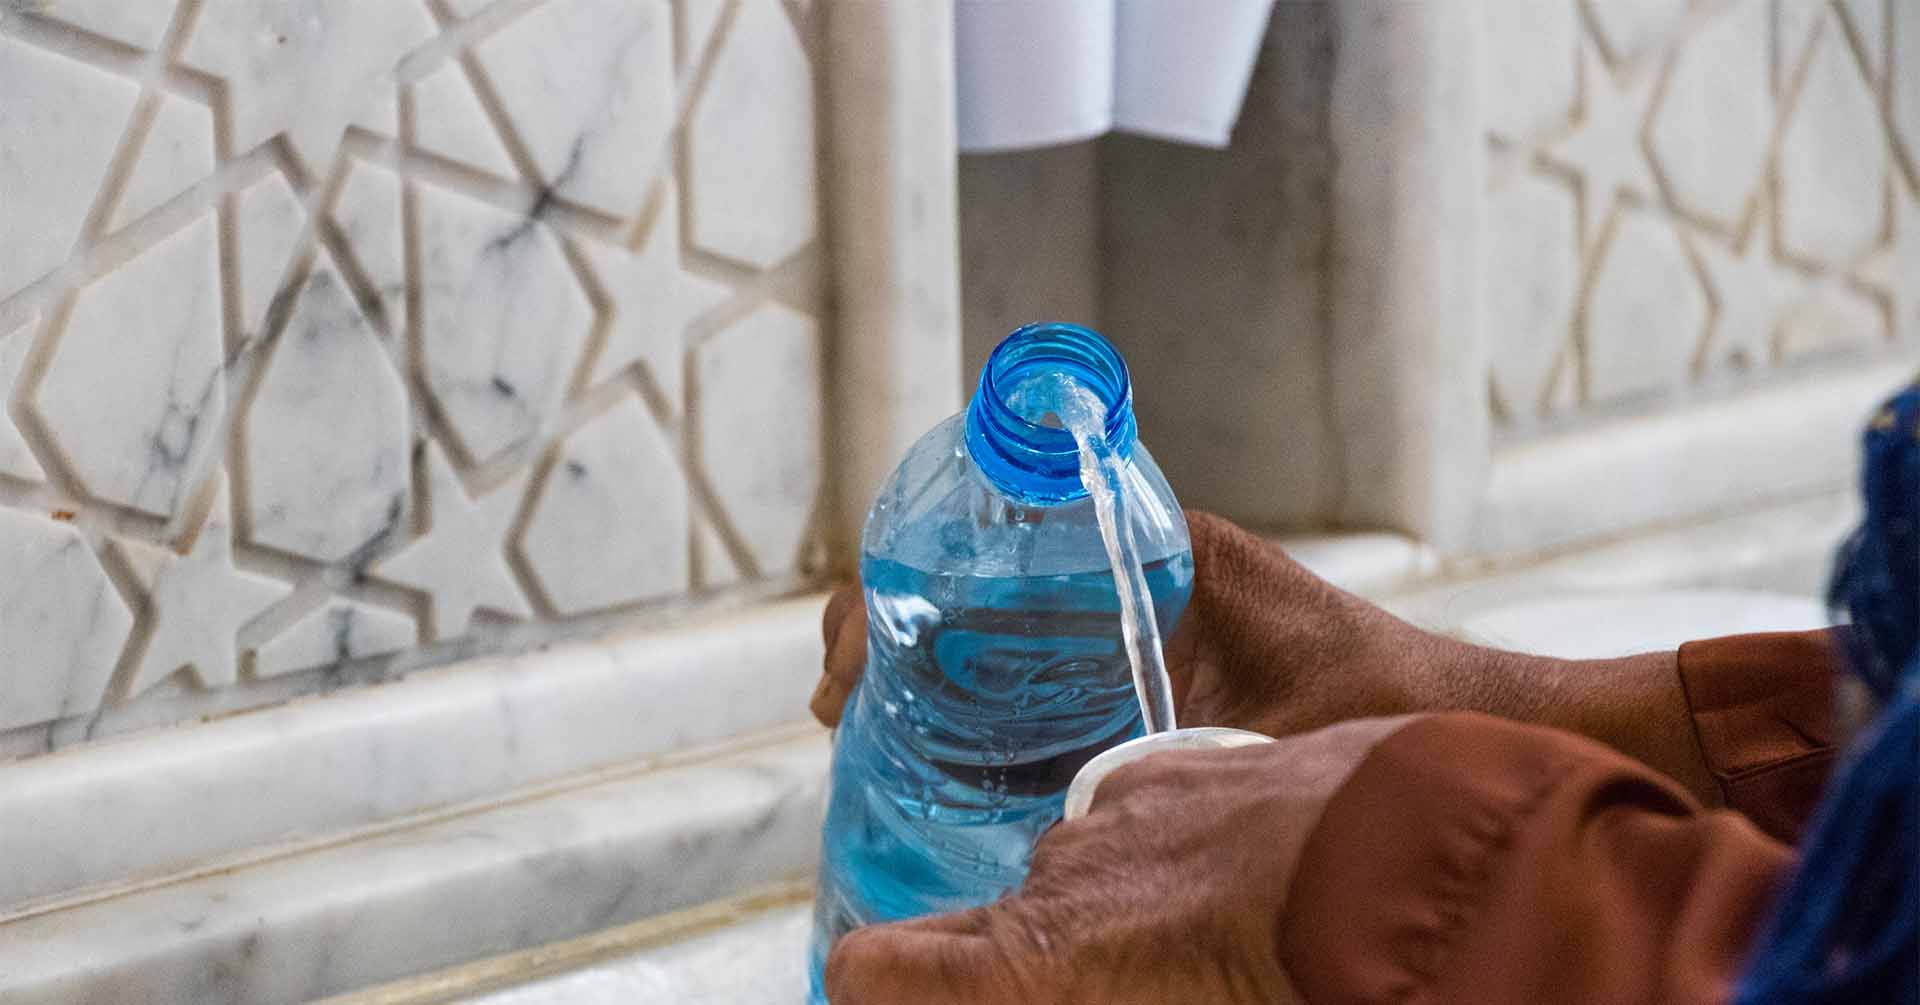 zamzam water being poured into a bottle at masjid al haram